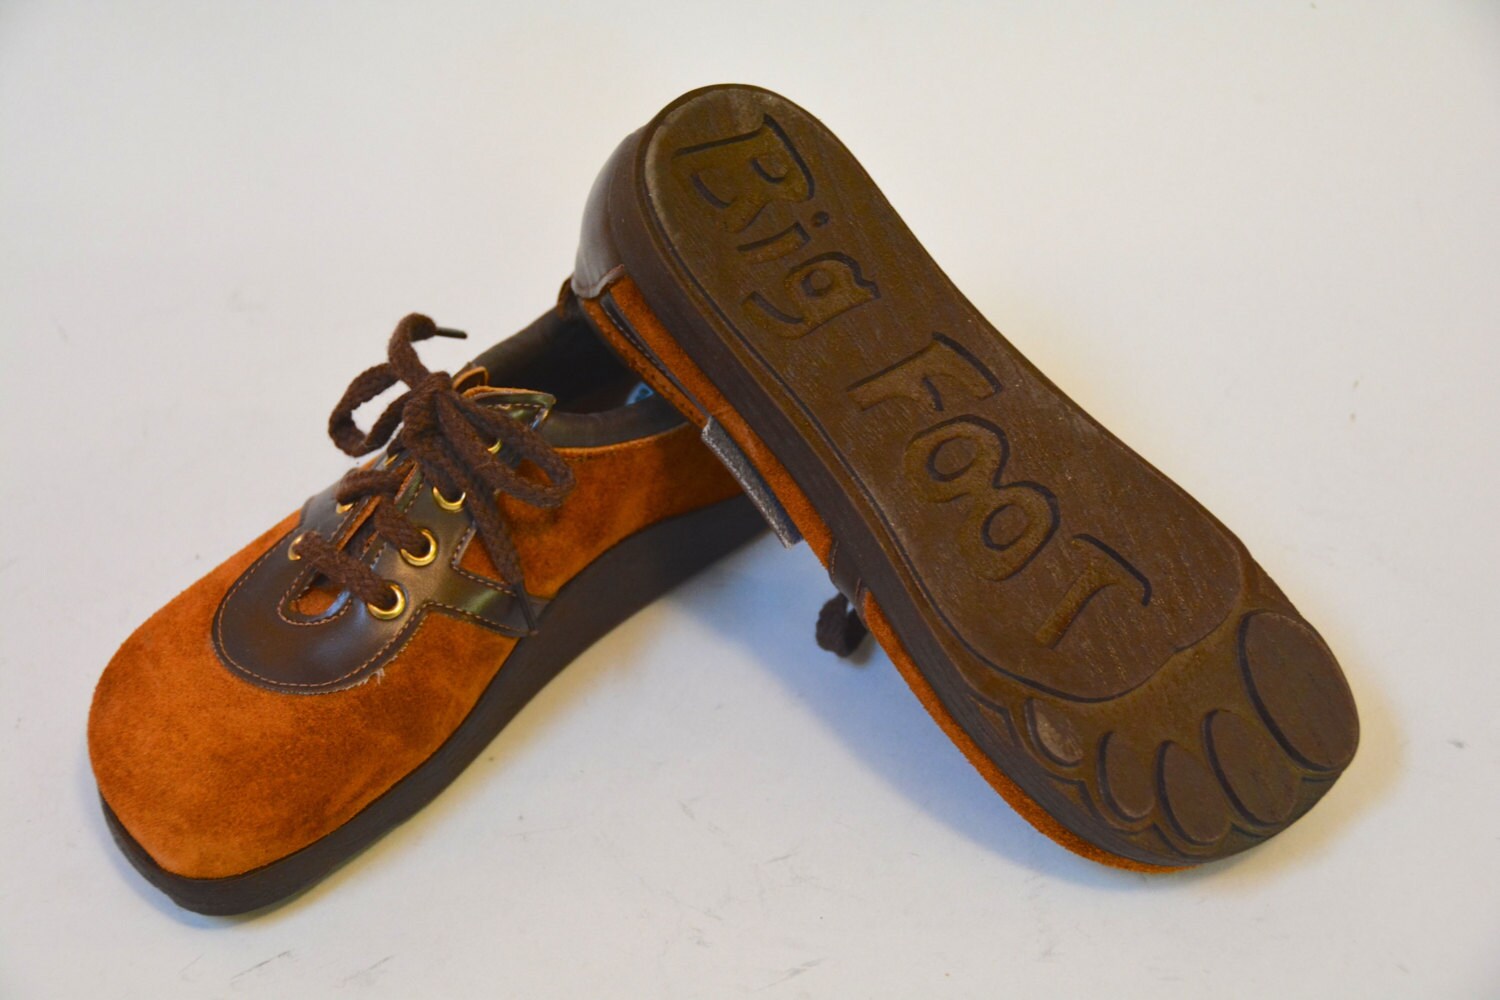 buster brown shoes 1980s